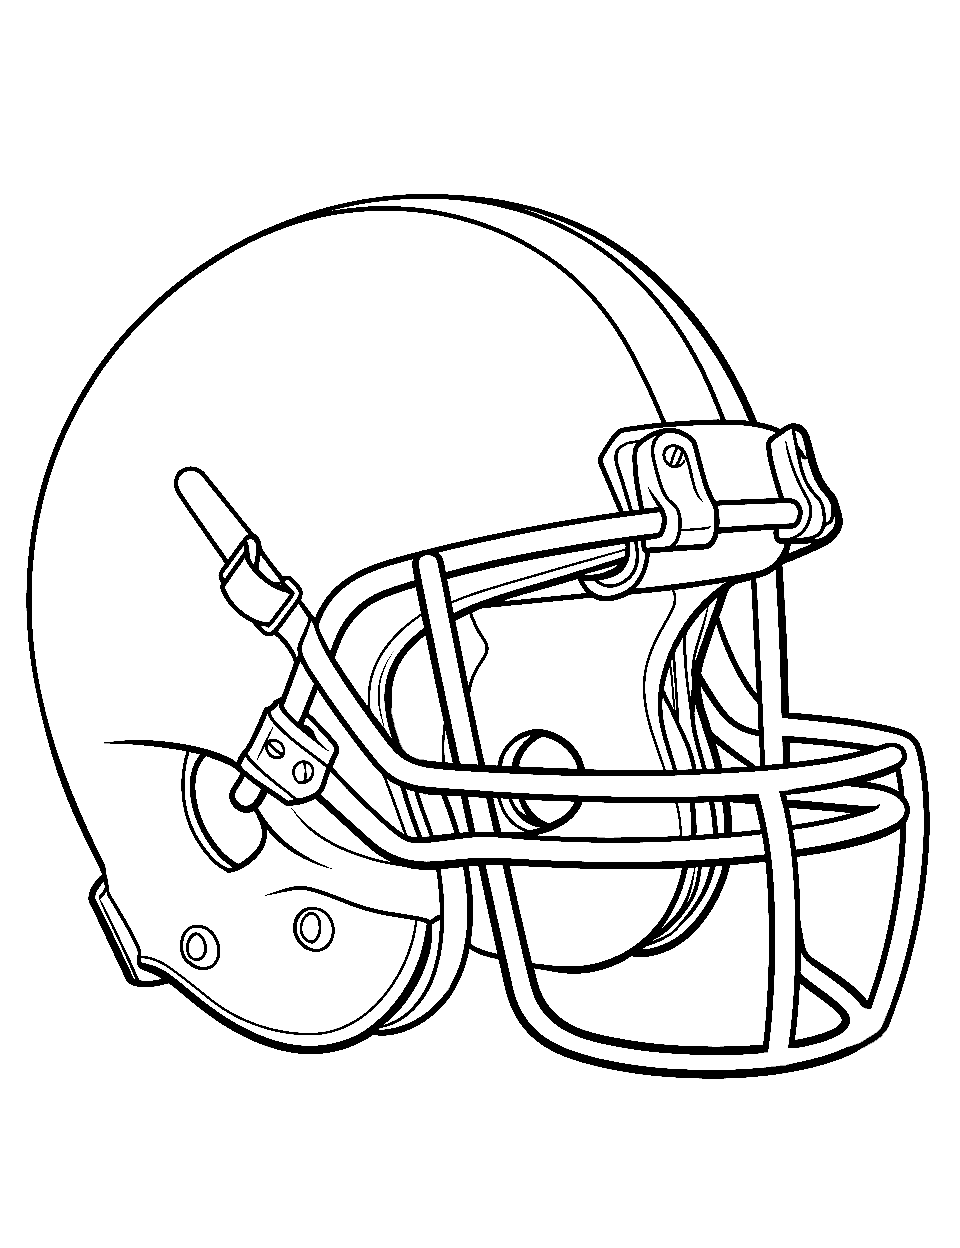 American football coloring pages free printables